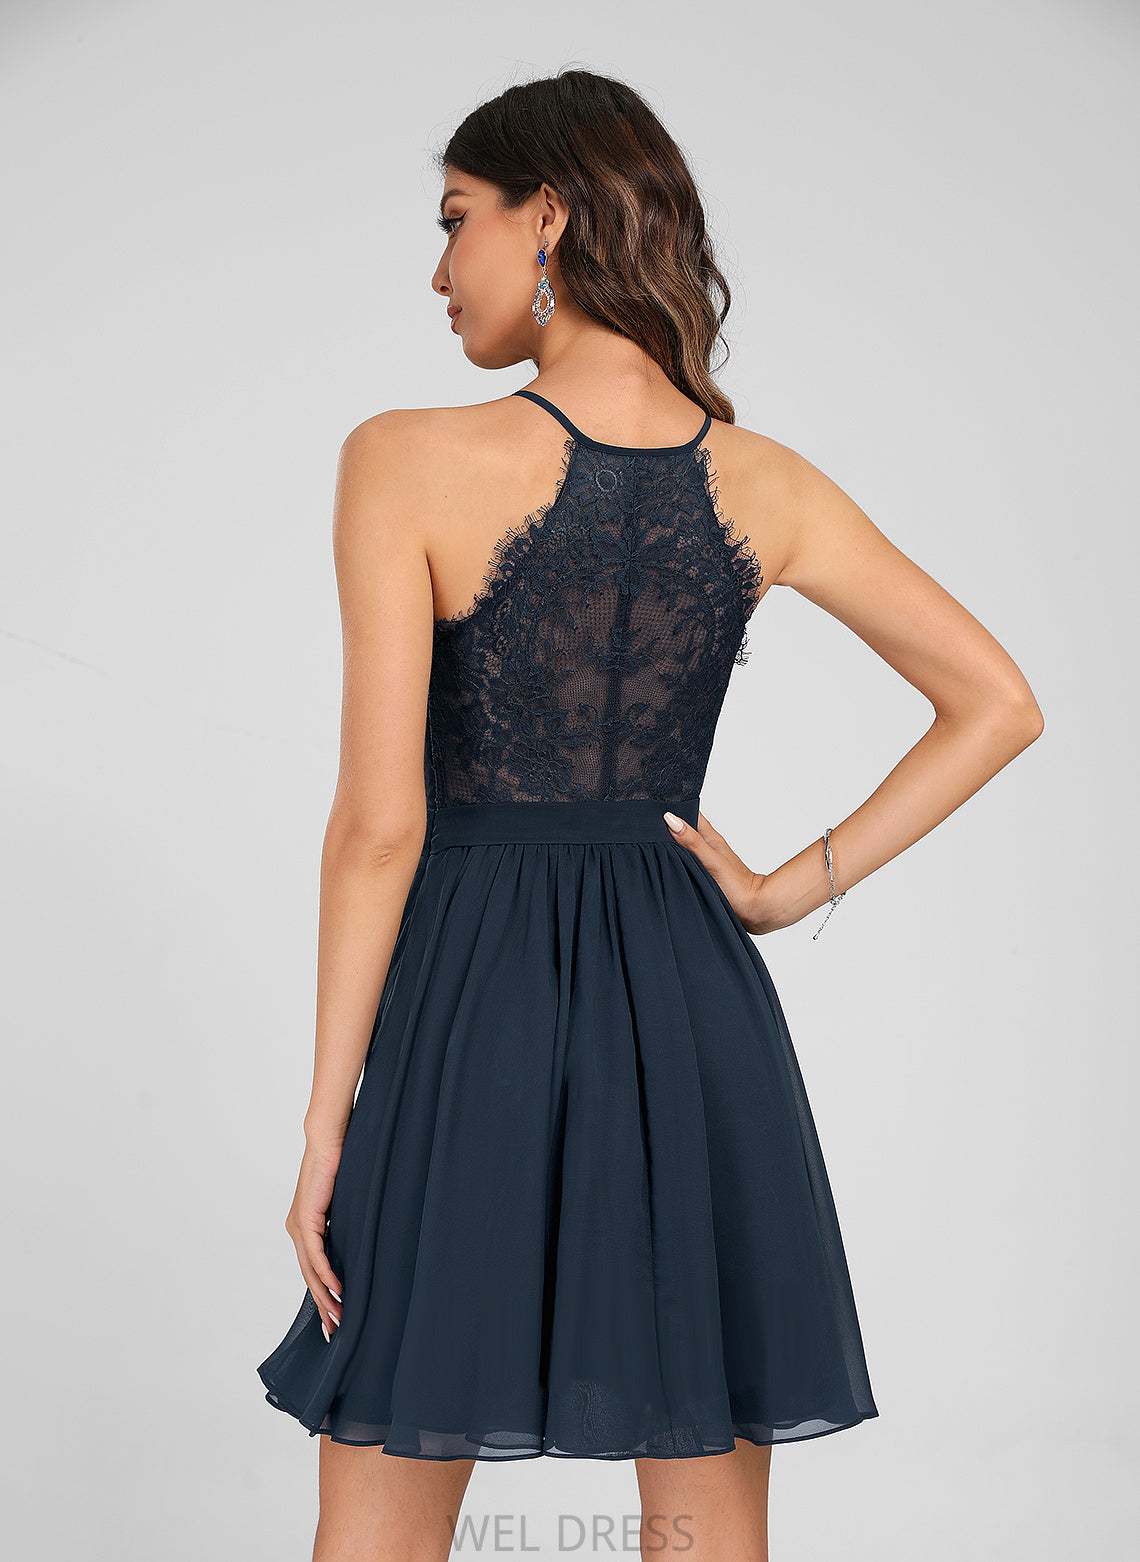 Chiffon Homecoming Homecoming Dresses With Short/Mini V-neck A-Line Rylie Dress Lace